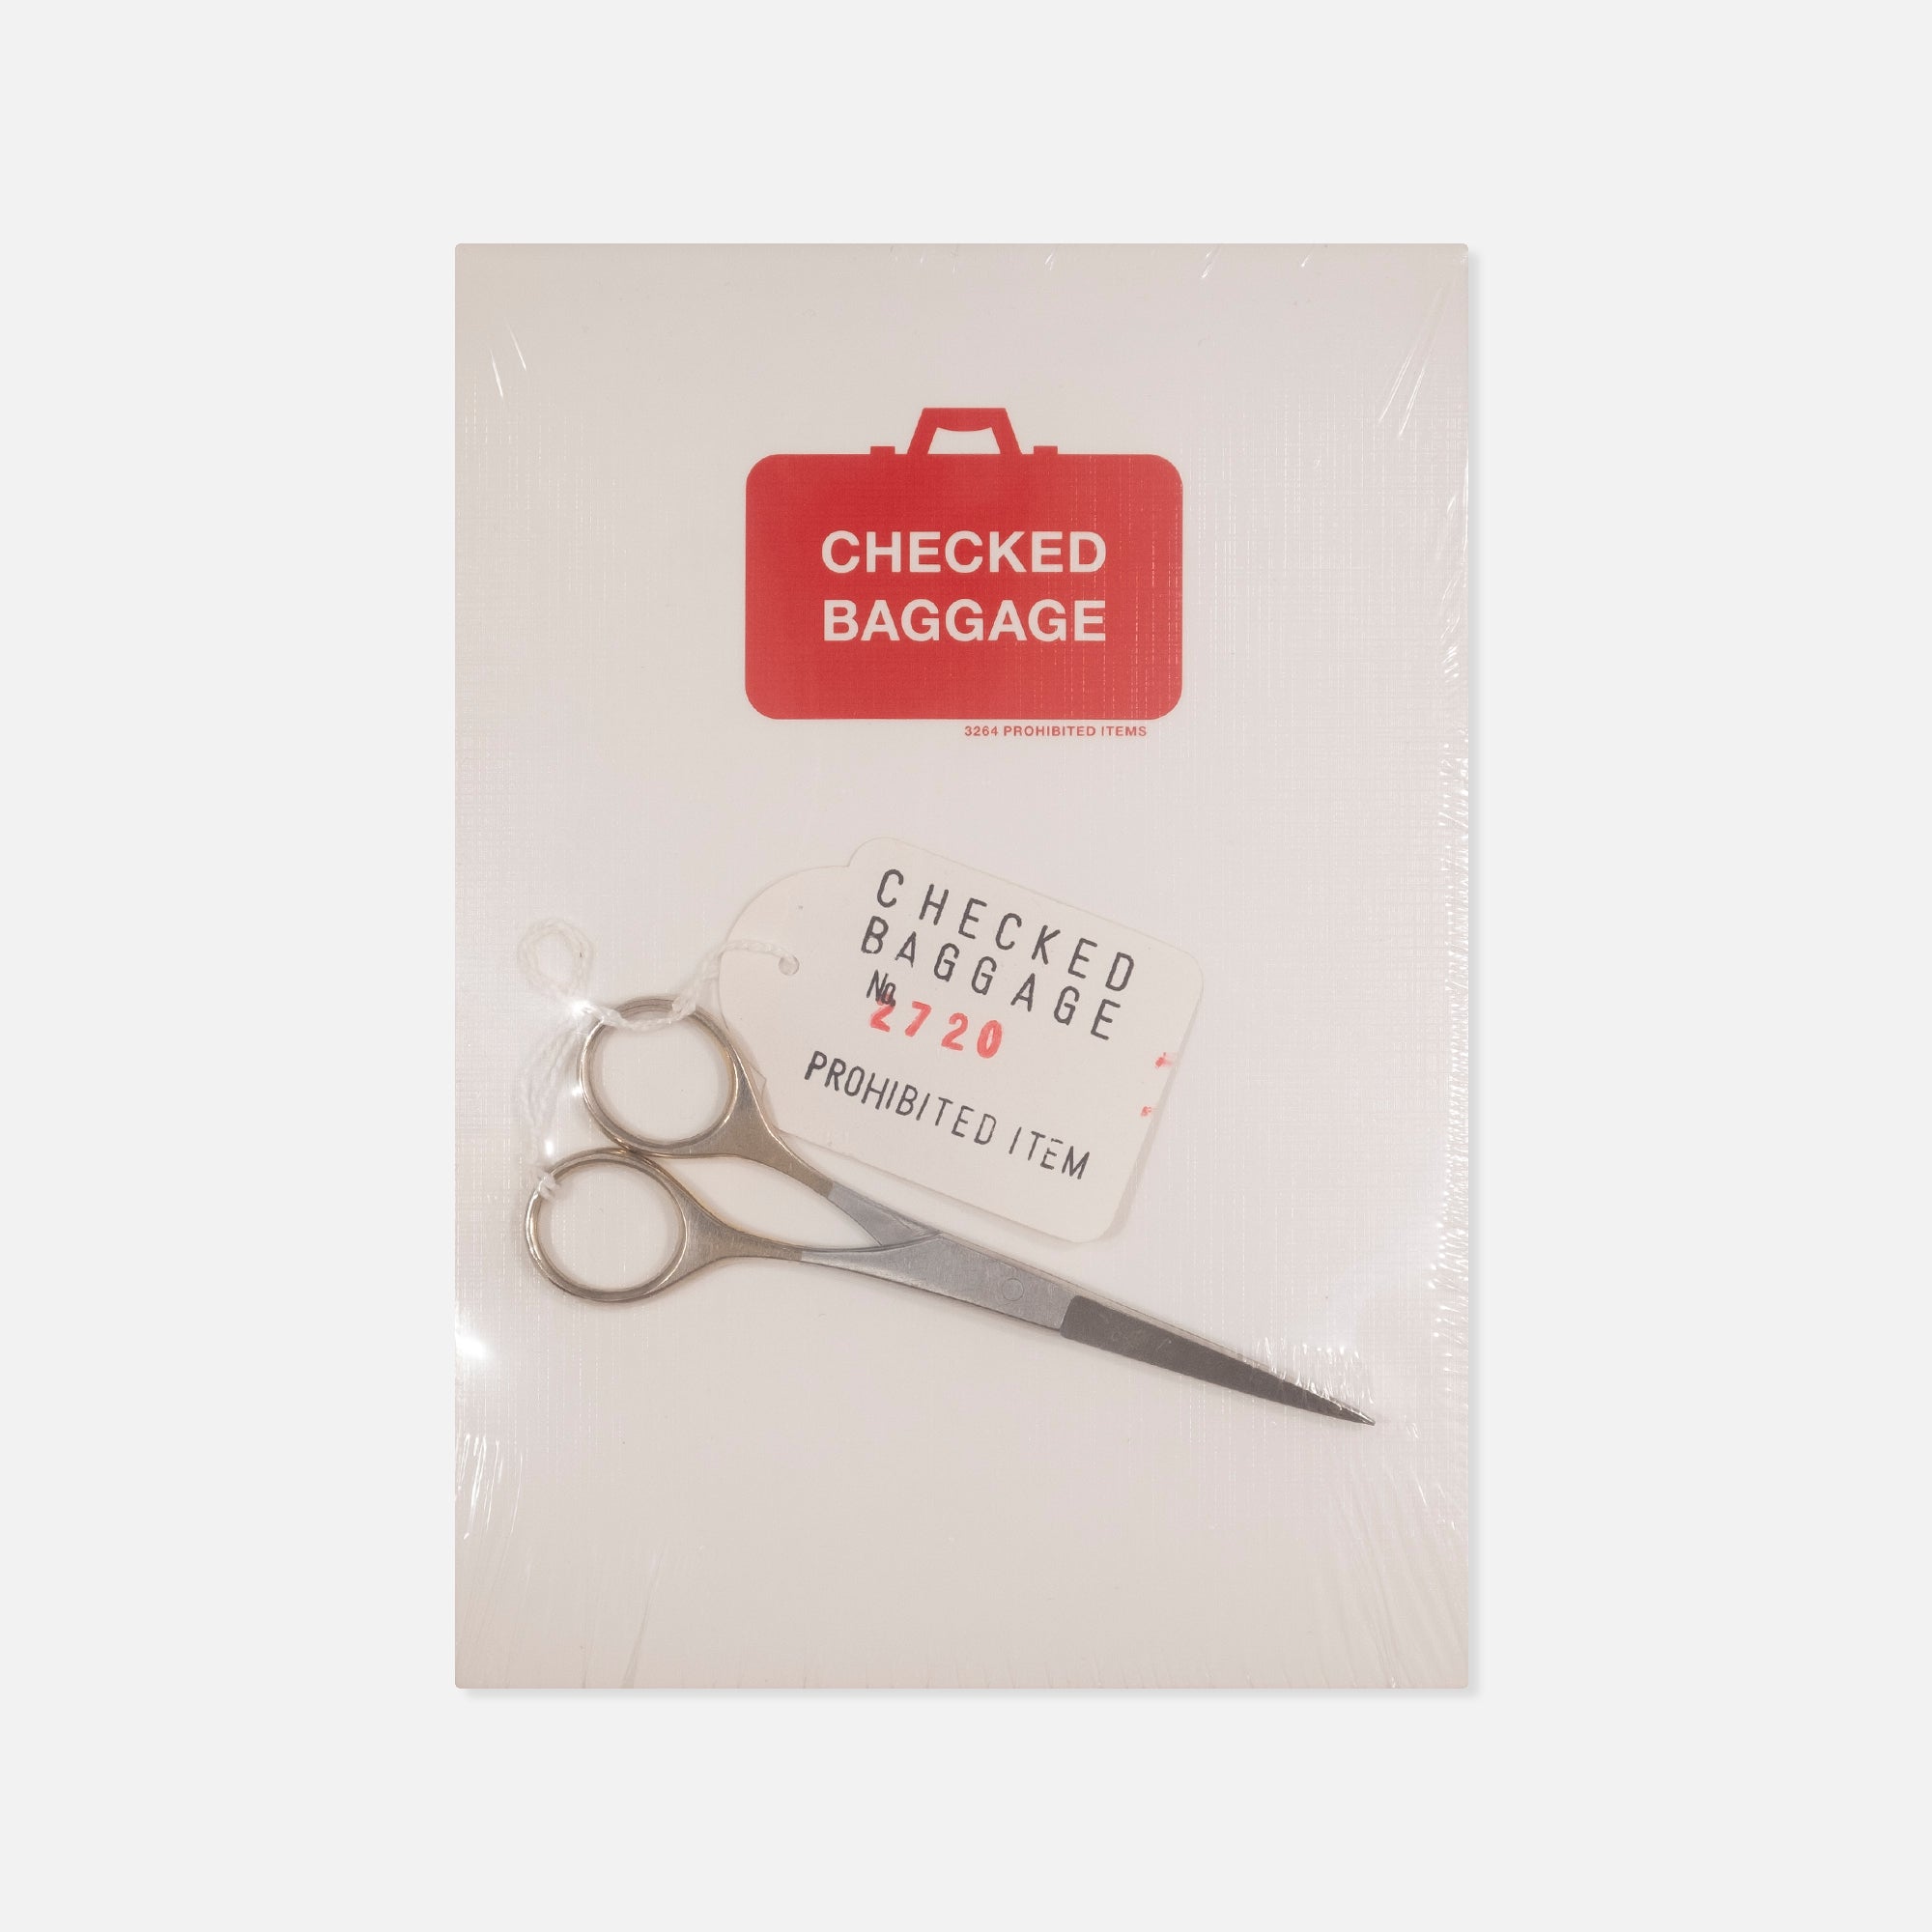 Christien Meindertsma — Checked Baggage: 3264 Prohibited Items